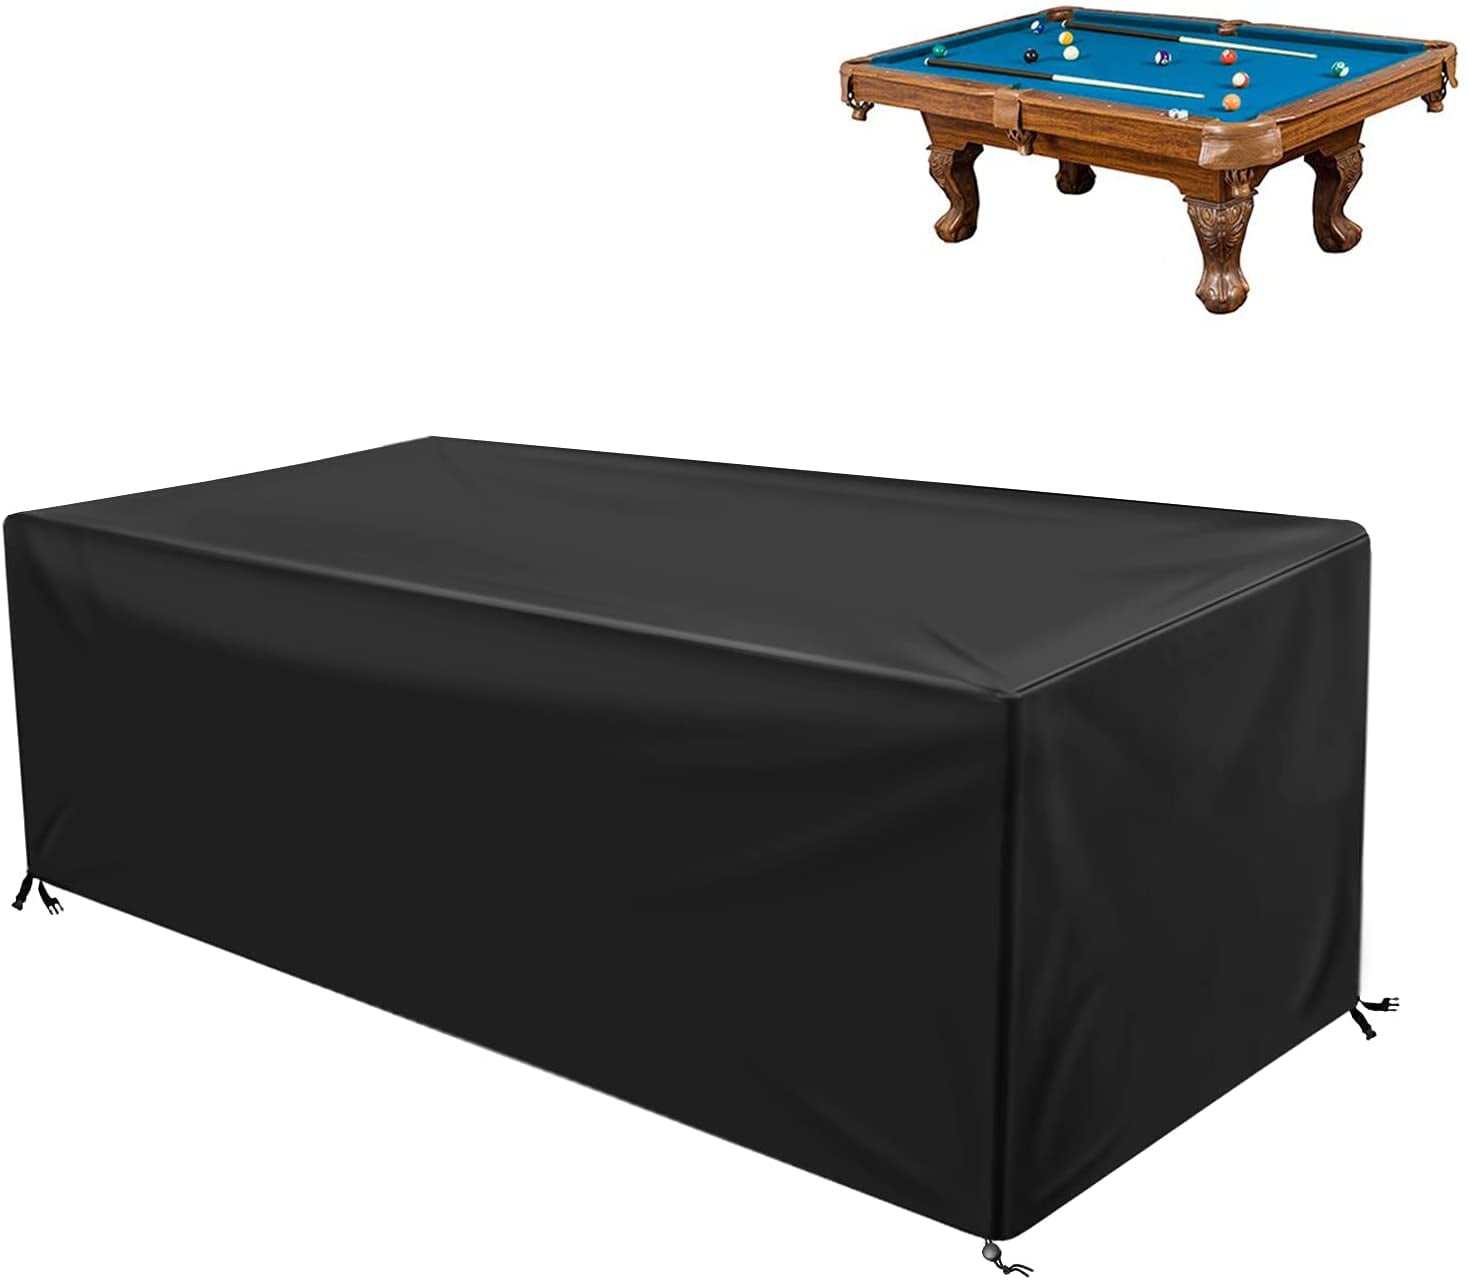 8 ft Foot Heavy Duty Waterproof Billiard Pool Table Cover Fitted Leatherette USA 